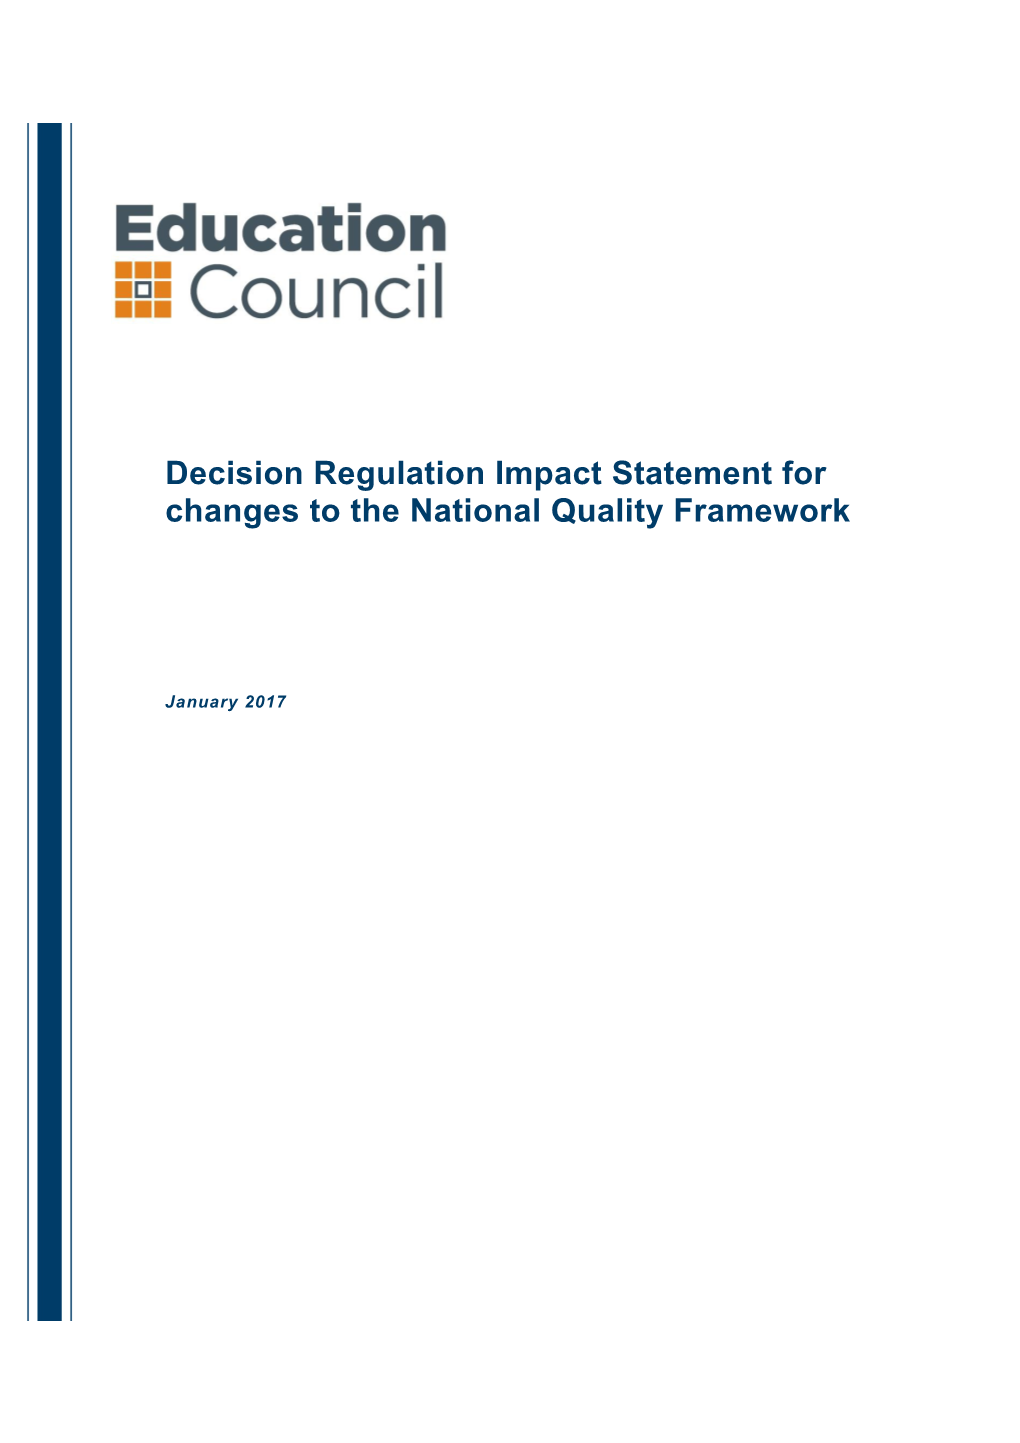 Decision Regulation Impact Statement for Changes to the National Quality Framework